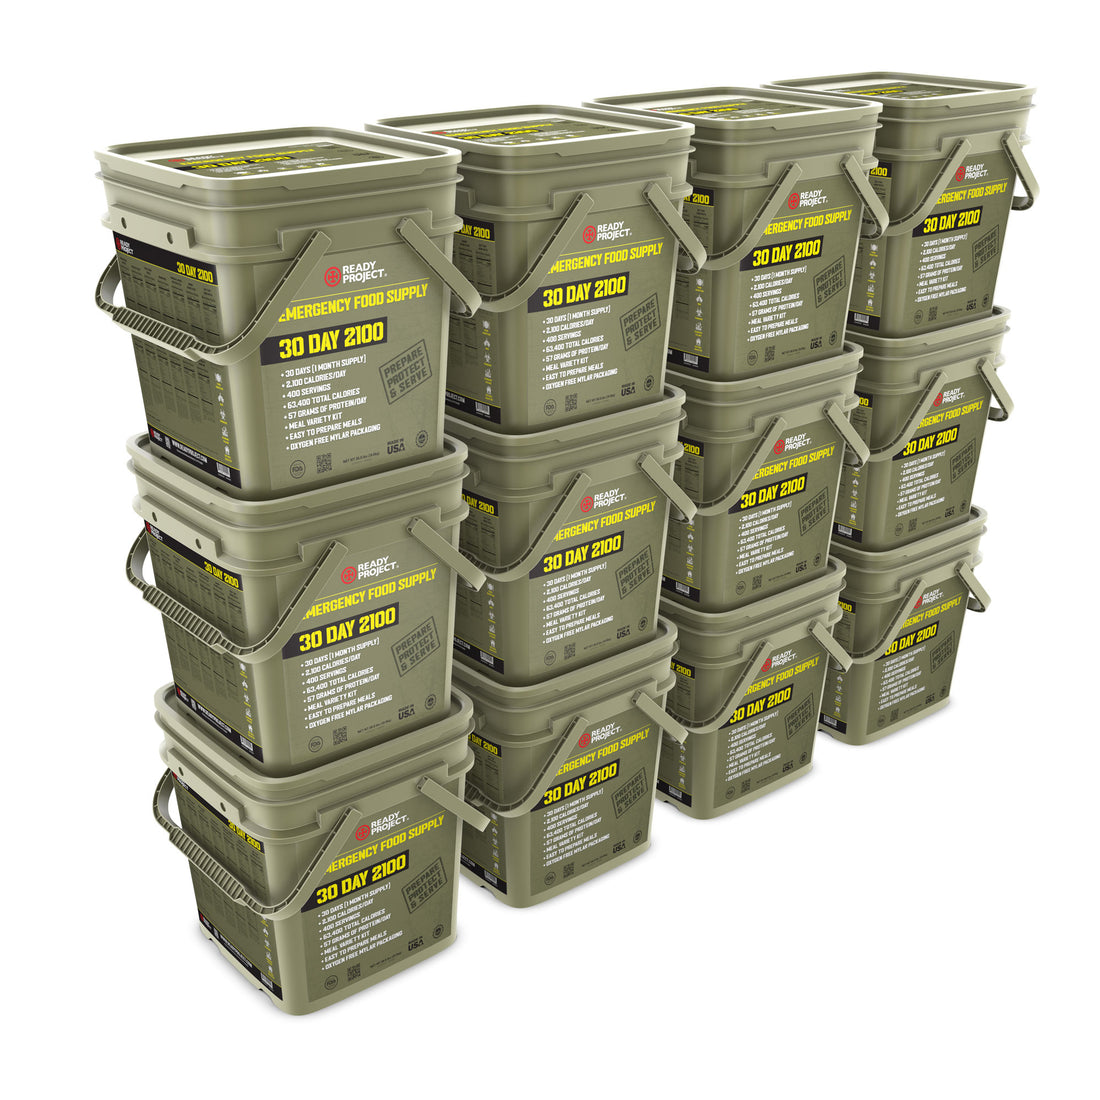 Ready Project® 12 Month (4,800 Servings) Emergency Food Supply